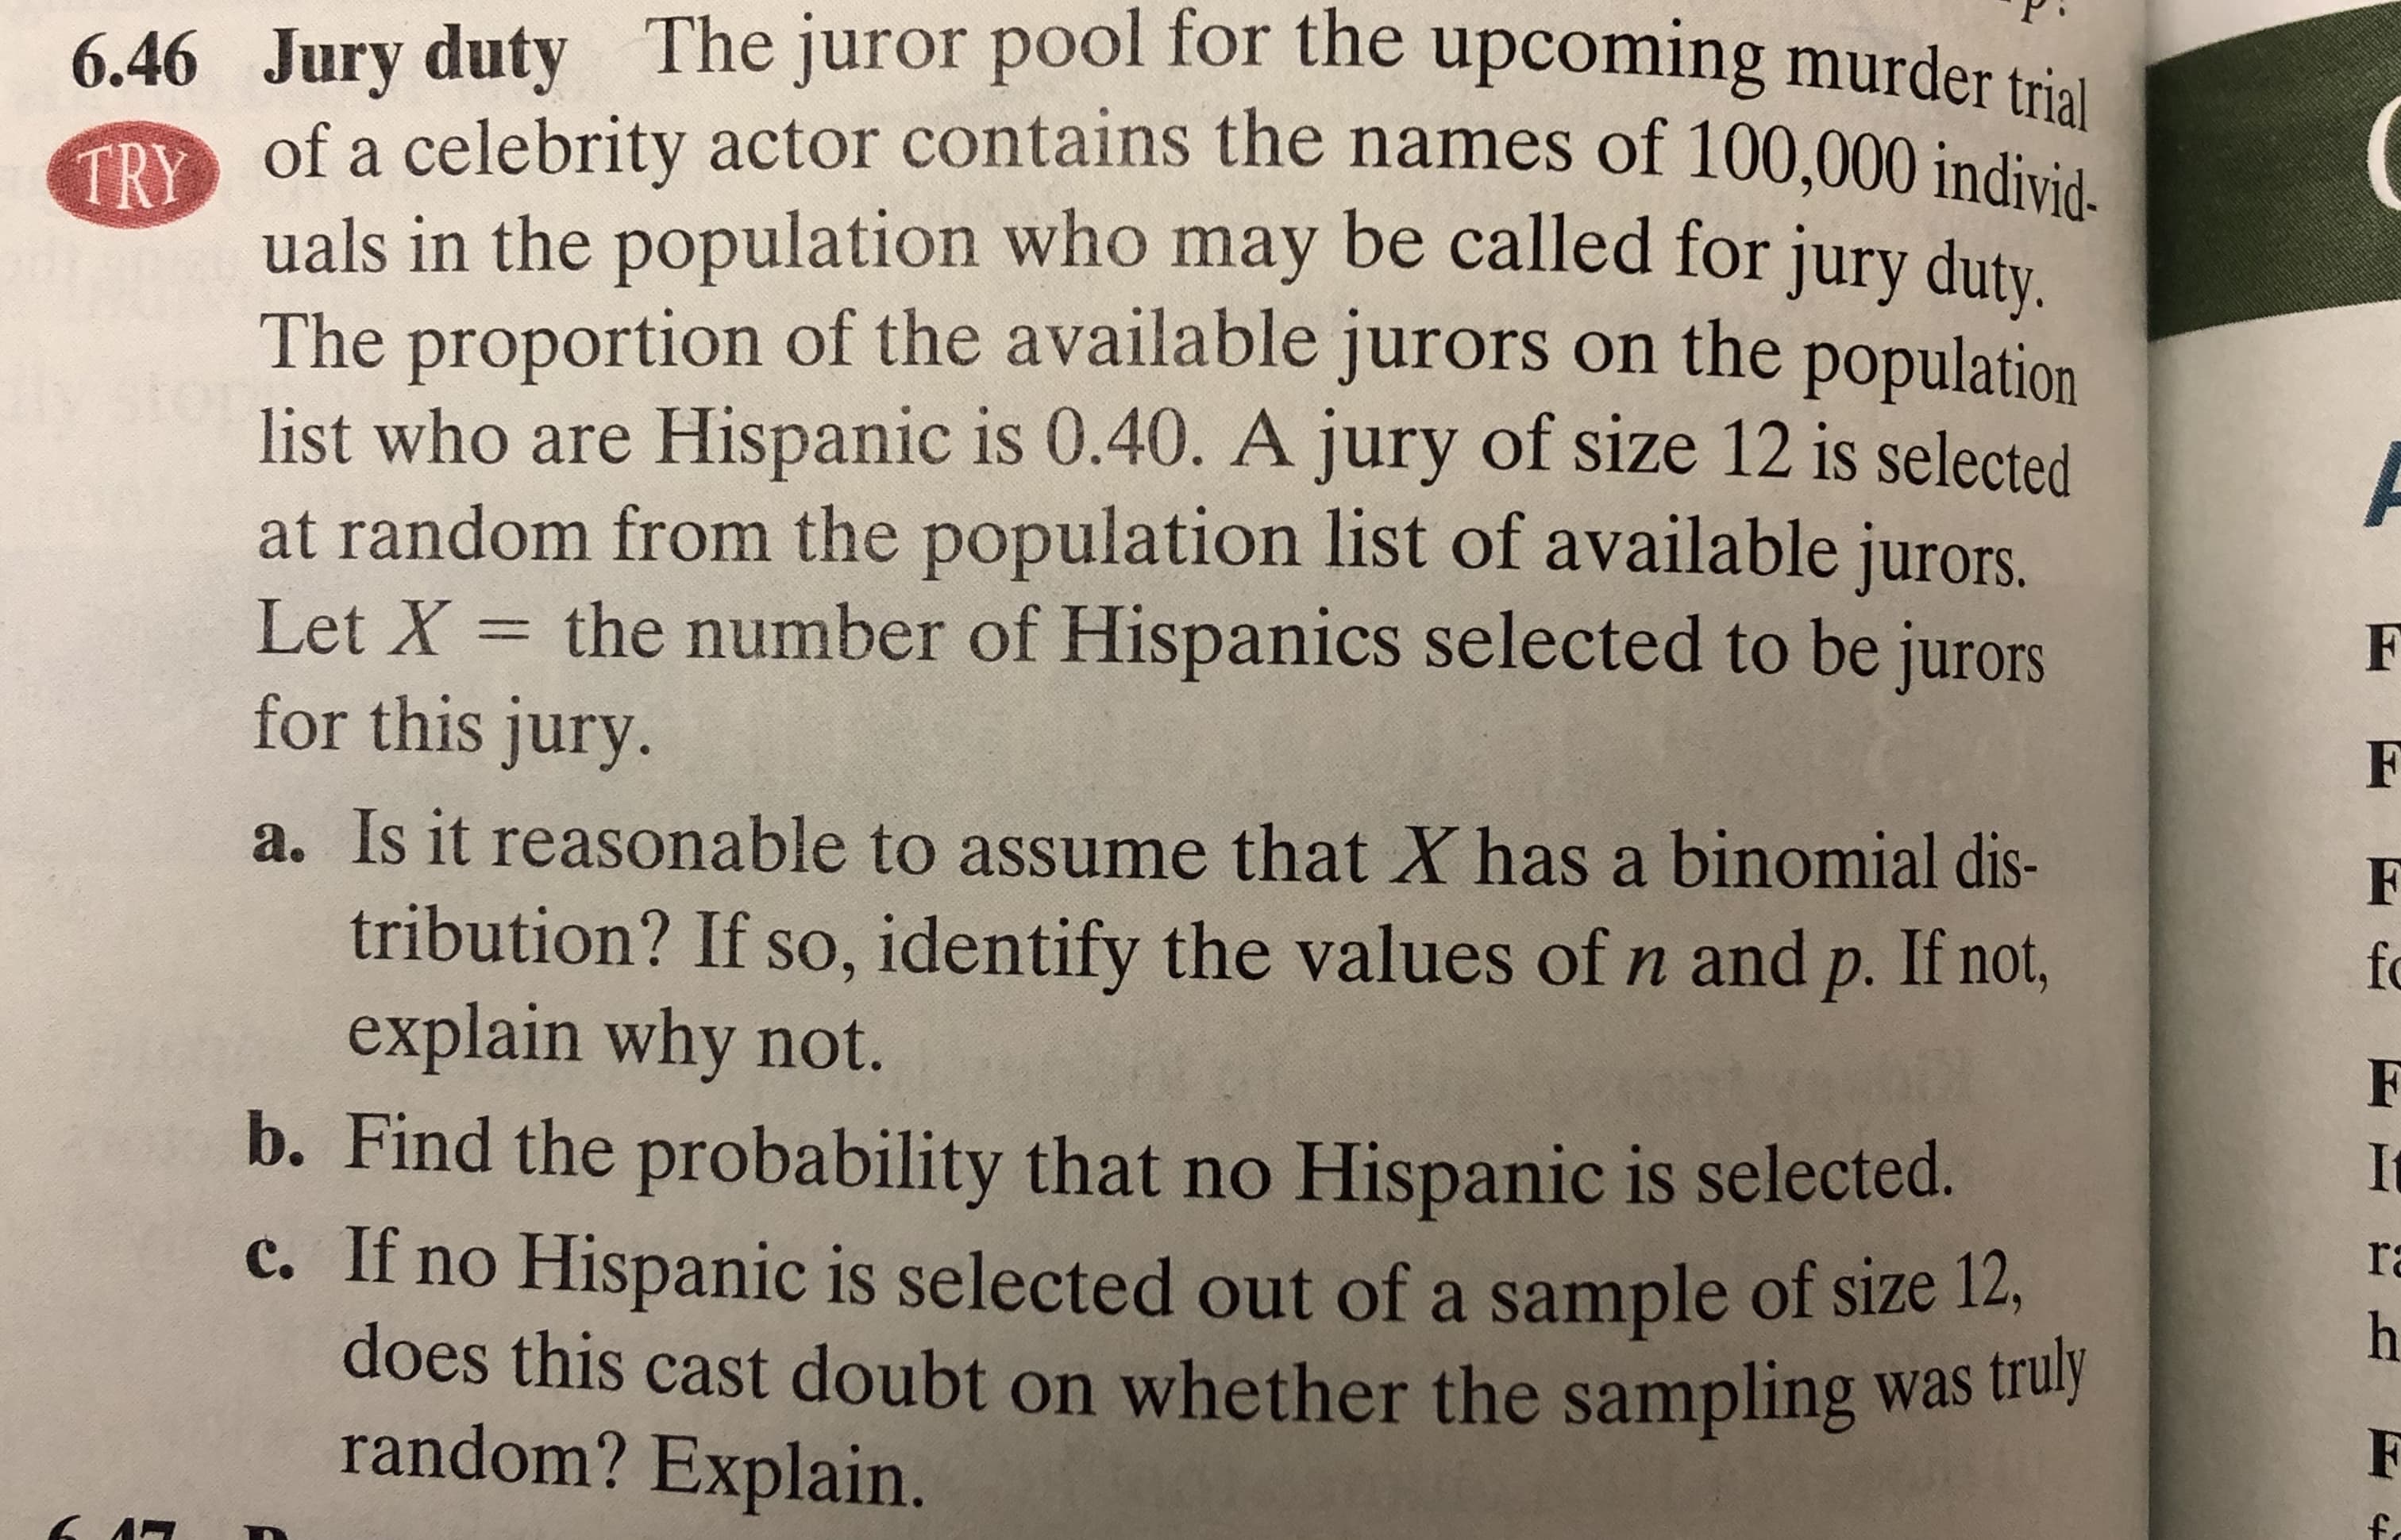 6.46 Jury duty The juror pool for the upcoming murder ti.
of a celebrity actor contains the names of 100,000 individ-
TRY
uals in the population who may be called for jury duty
proportion of the available jurors on the population
list who are Hispanic is 0.40. A jury of size 12 is selected
at random from the population list of available jurors.
Let X = the number of Hispanics selected to be jurors
for this jury.
The
a. Is it reasonable to assume that X has a binomial dis-
tribution? If so, identify the values of n and p. If not,
explain why not.
b. Find the probability that no Hispanic is selected.
c. If no Hispanic is selected out of a sample of size 12,
does this cast doubt on whether the sampling was truly
fo
It
ra
random? Explain.
F
fo
